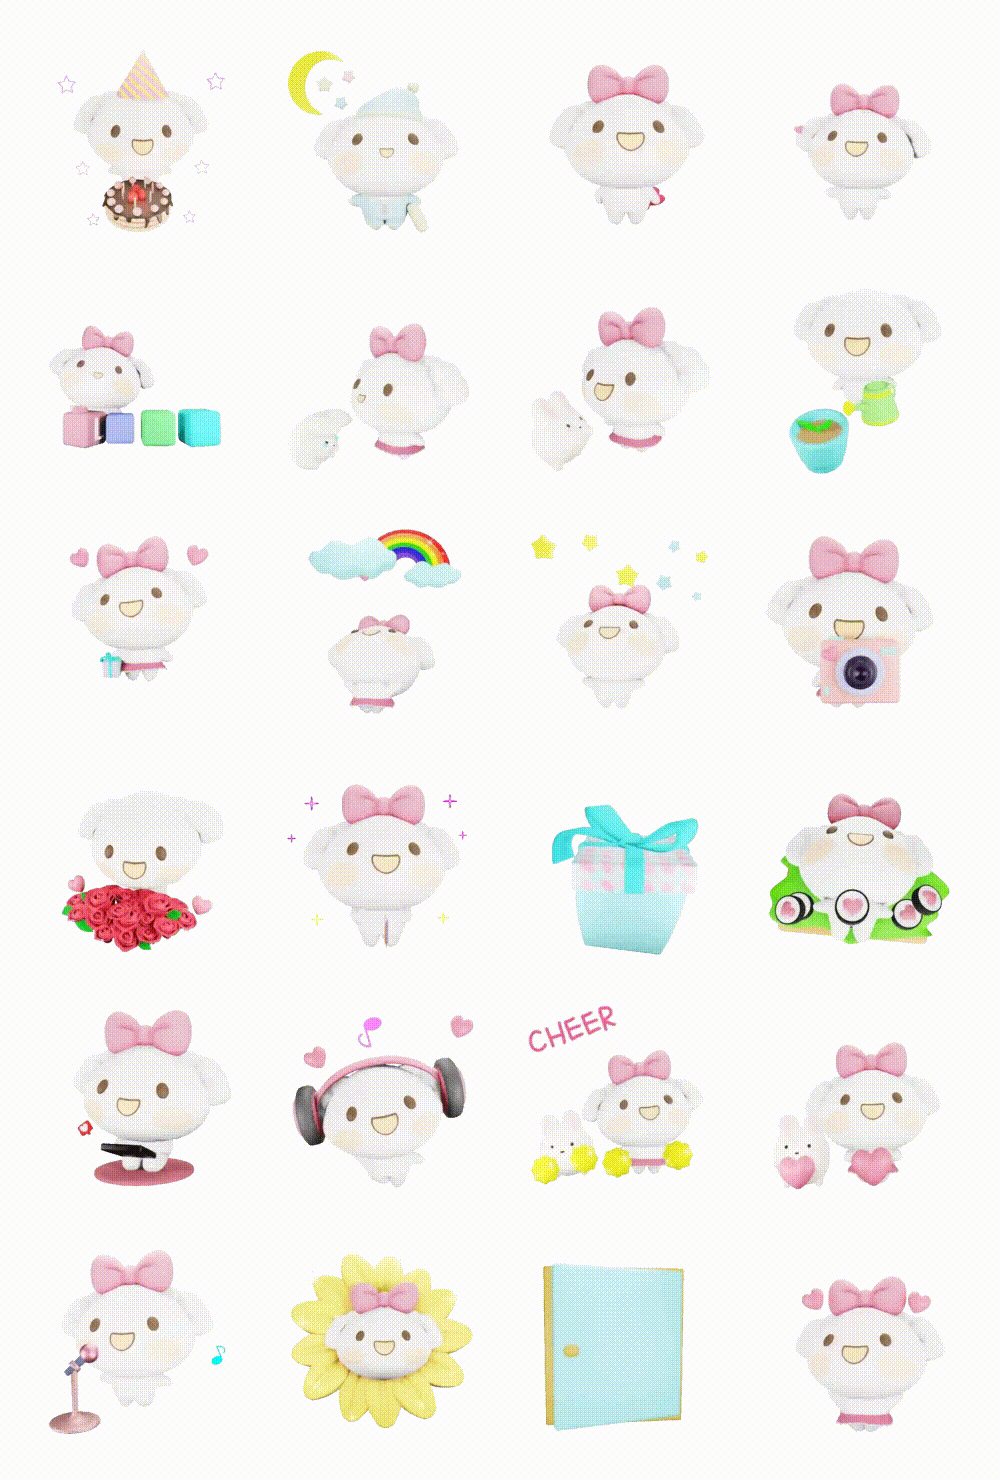 Pink Ribbon Puppy Deng Deng Animals,Animation/Cartoon sticker pack for Whatsapp, Telegram, Signal, and others chatting and message apps